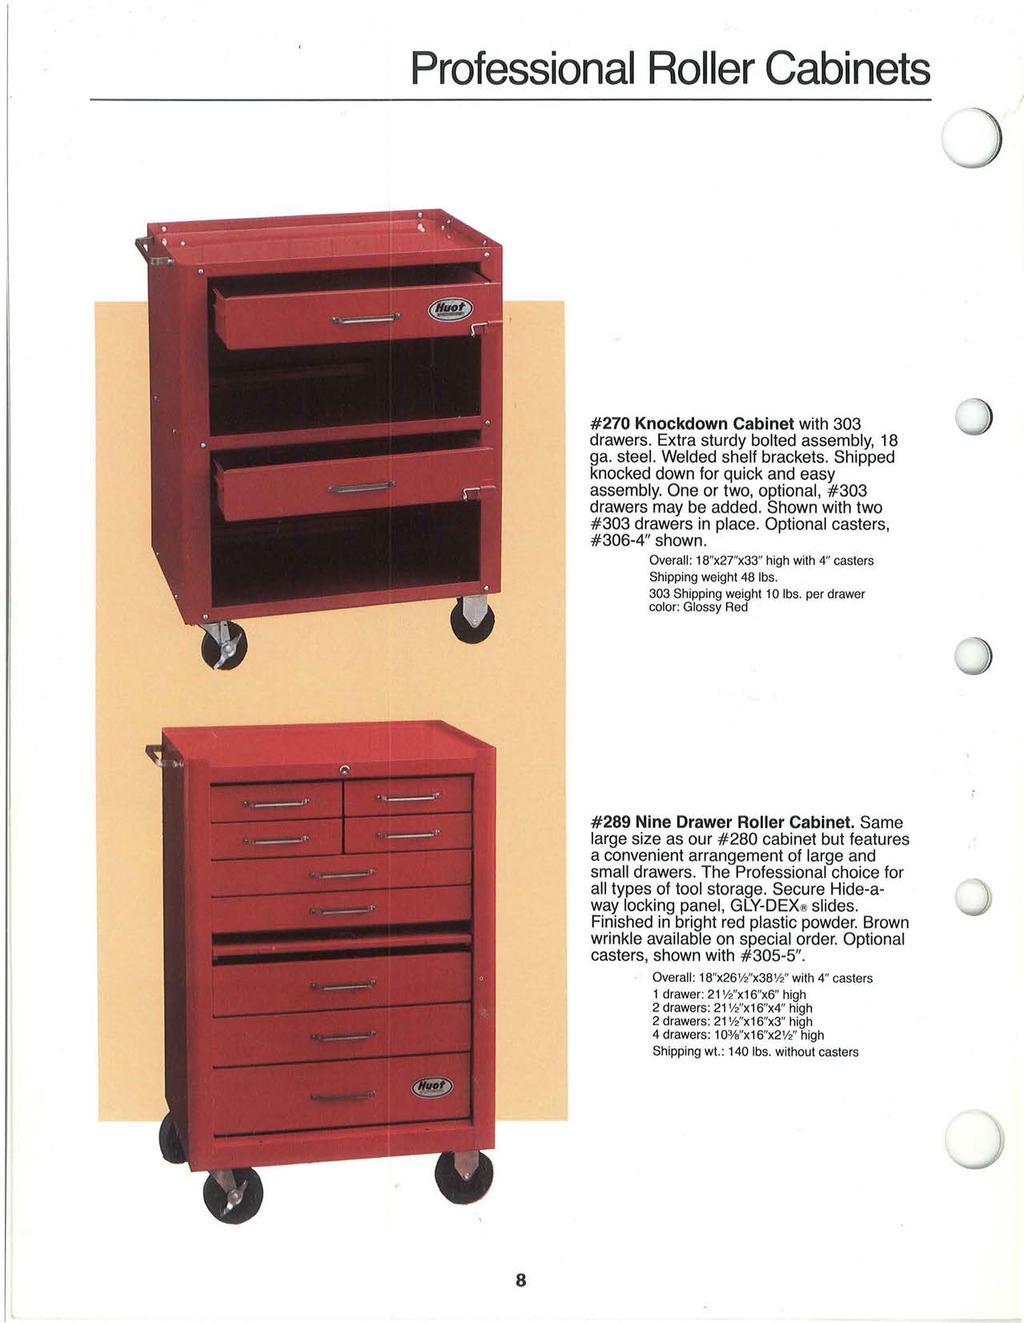 Professional Roller Cabinets #270 Knockdown Cabinet with 303 drawers. Extra sturdy bolted assembly, 18 ga. steel. Welded shelf brackets. Shipped knocked down for quick and easy assembly.